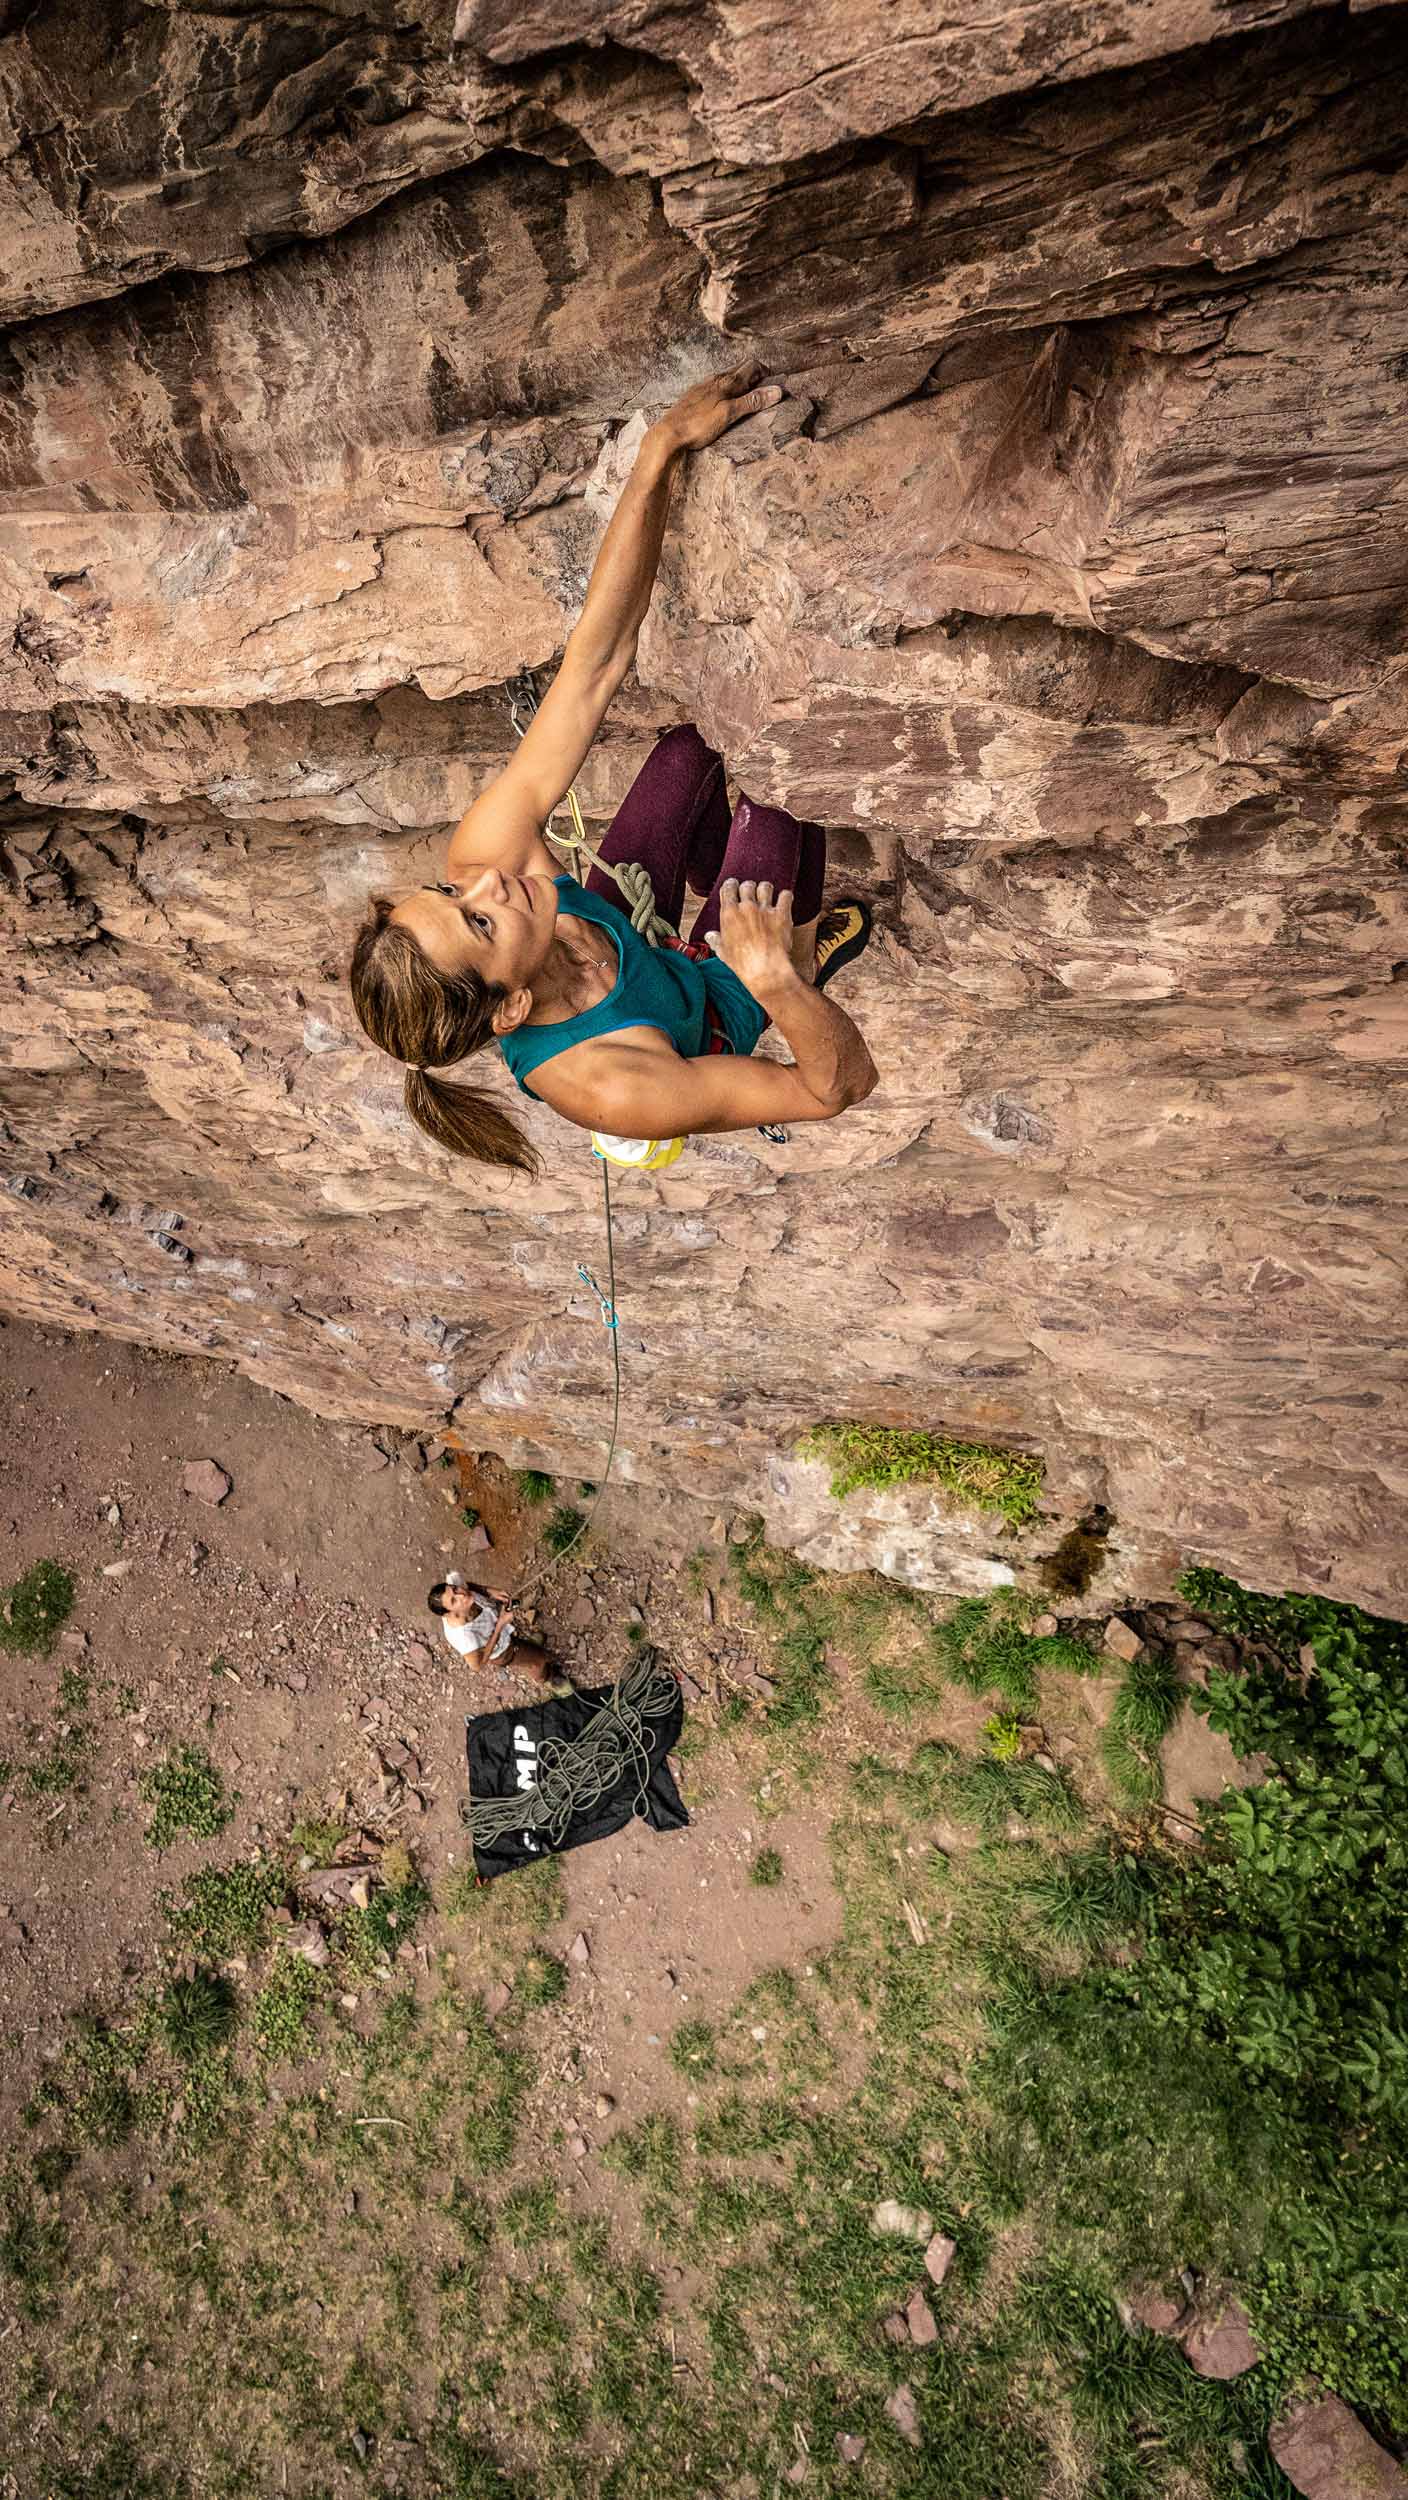 Audrey Sneizek on Seduction of Gravity (5.10a), Rotary Park